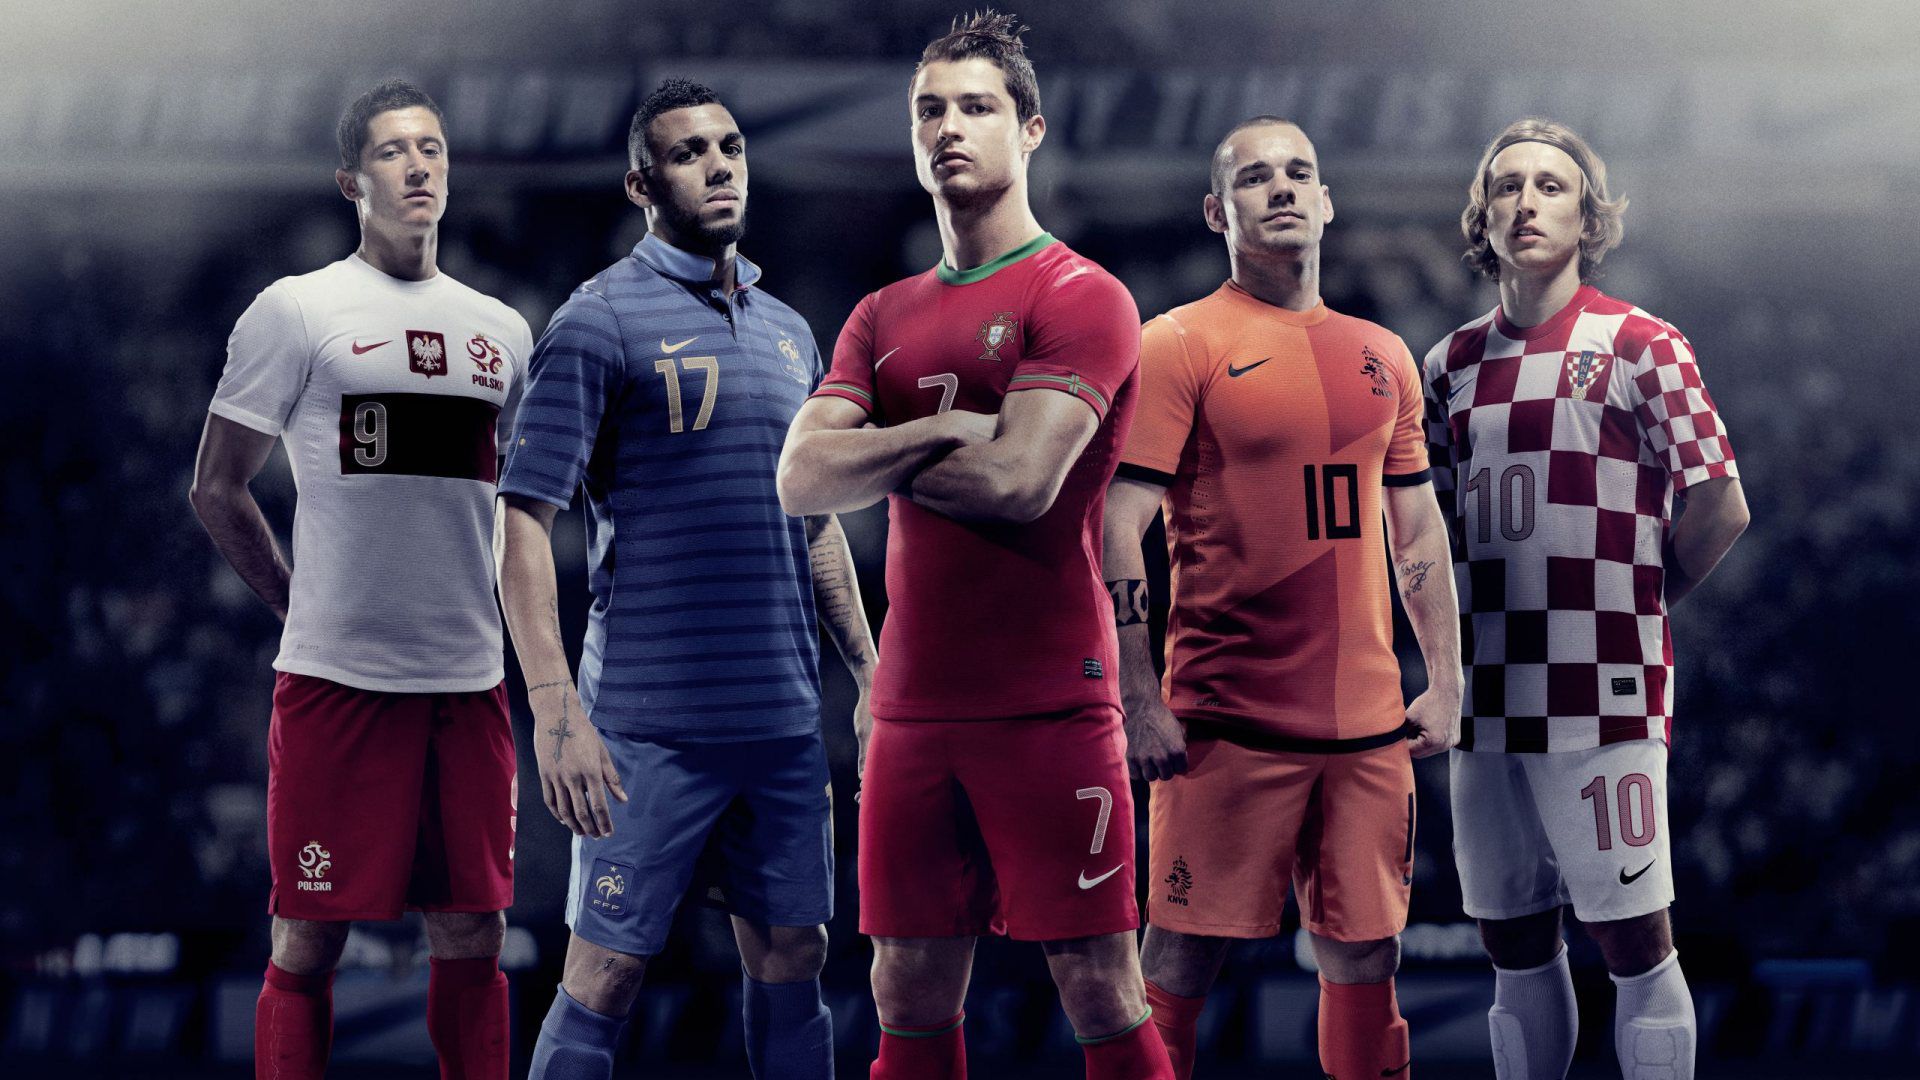 Euro Full High Definition Wallpaper Football Players P Your Top HD